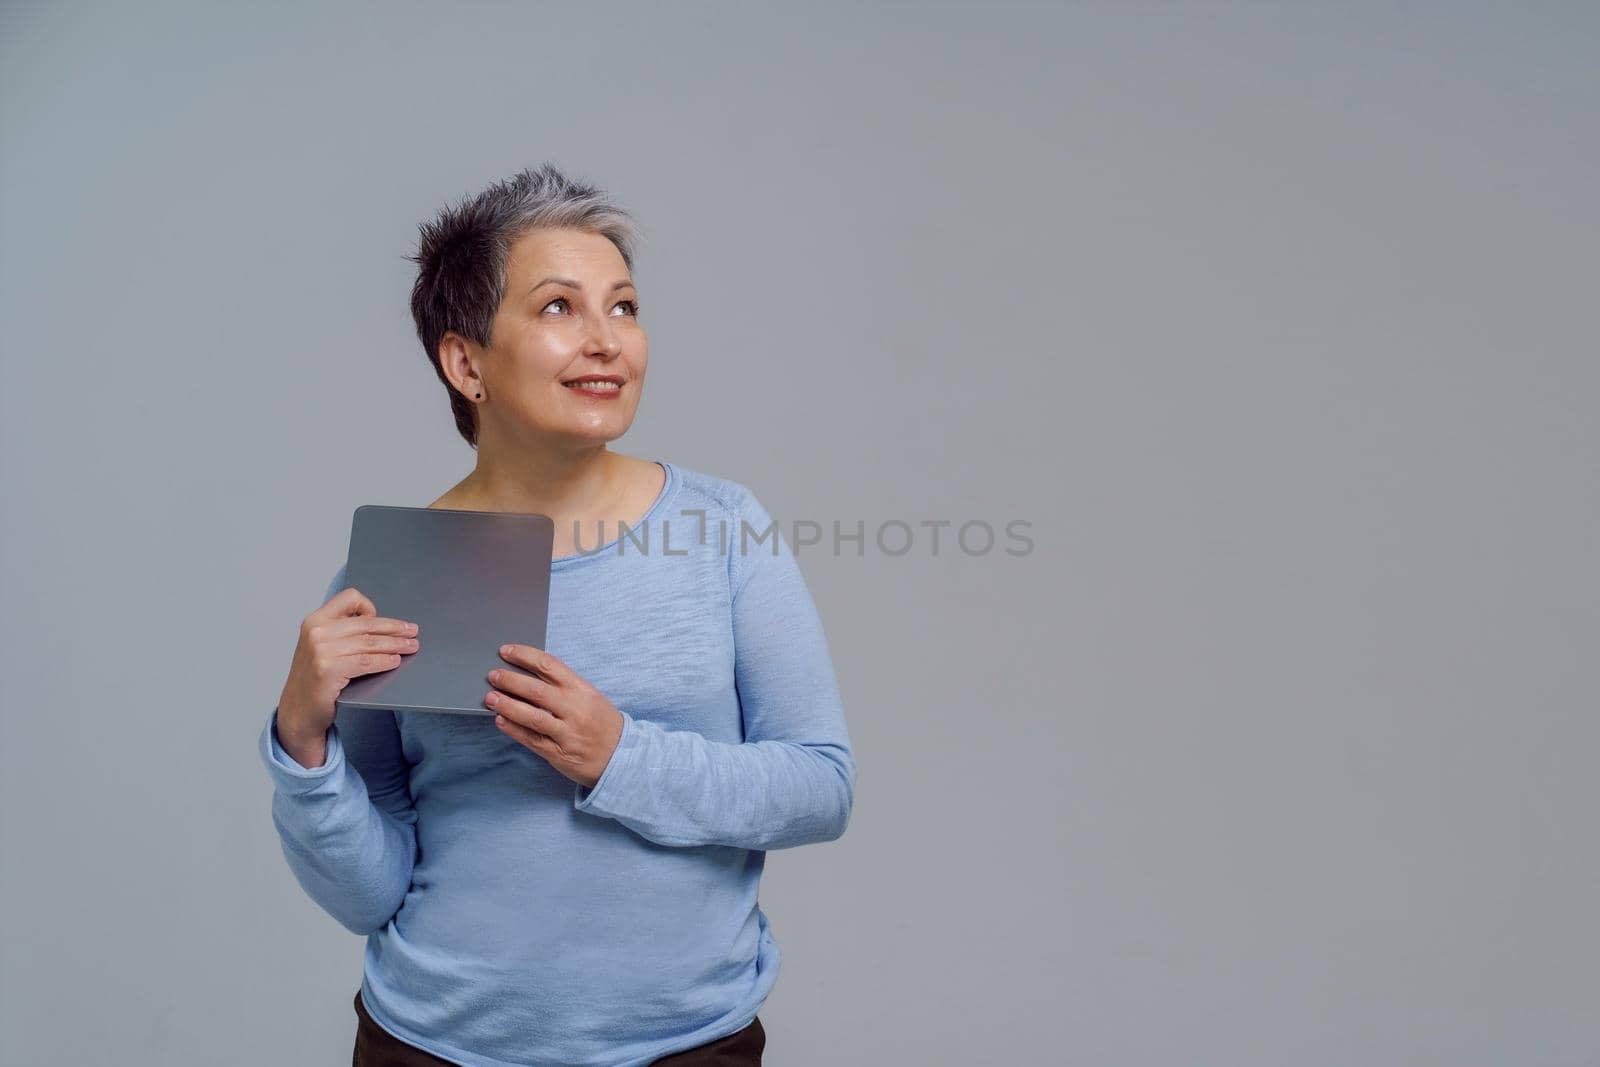 Dreaming beautiful mature grey haired woman in 50s holding digital tablet working or shopping online or checking on social media. Pretty woman in blue blouse isolated on white background. Toned image.